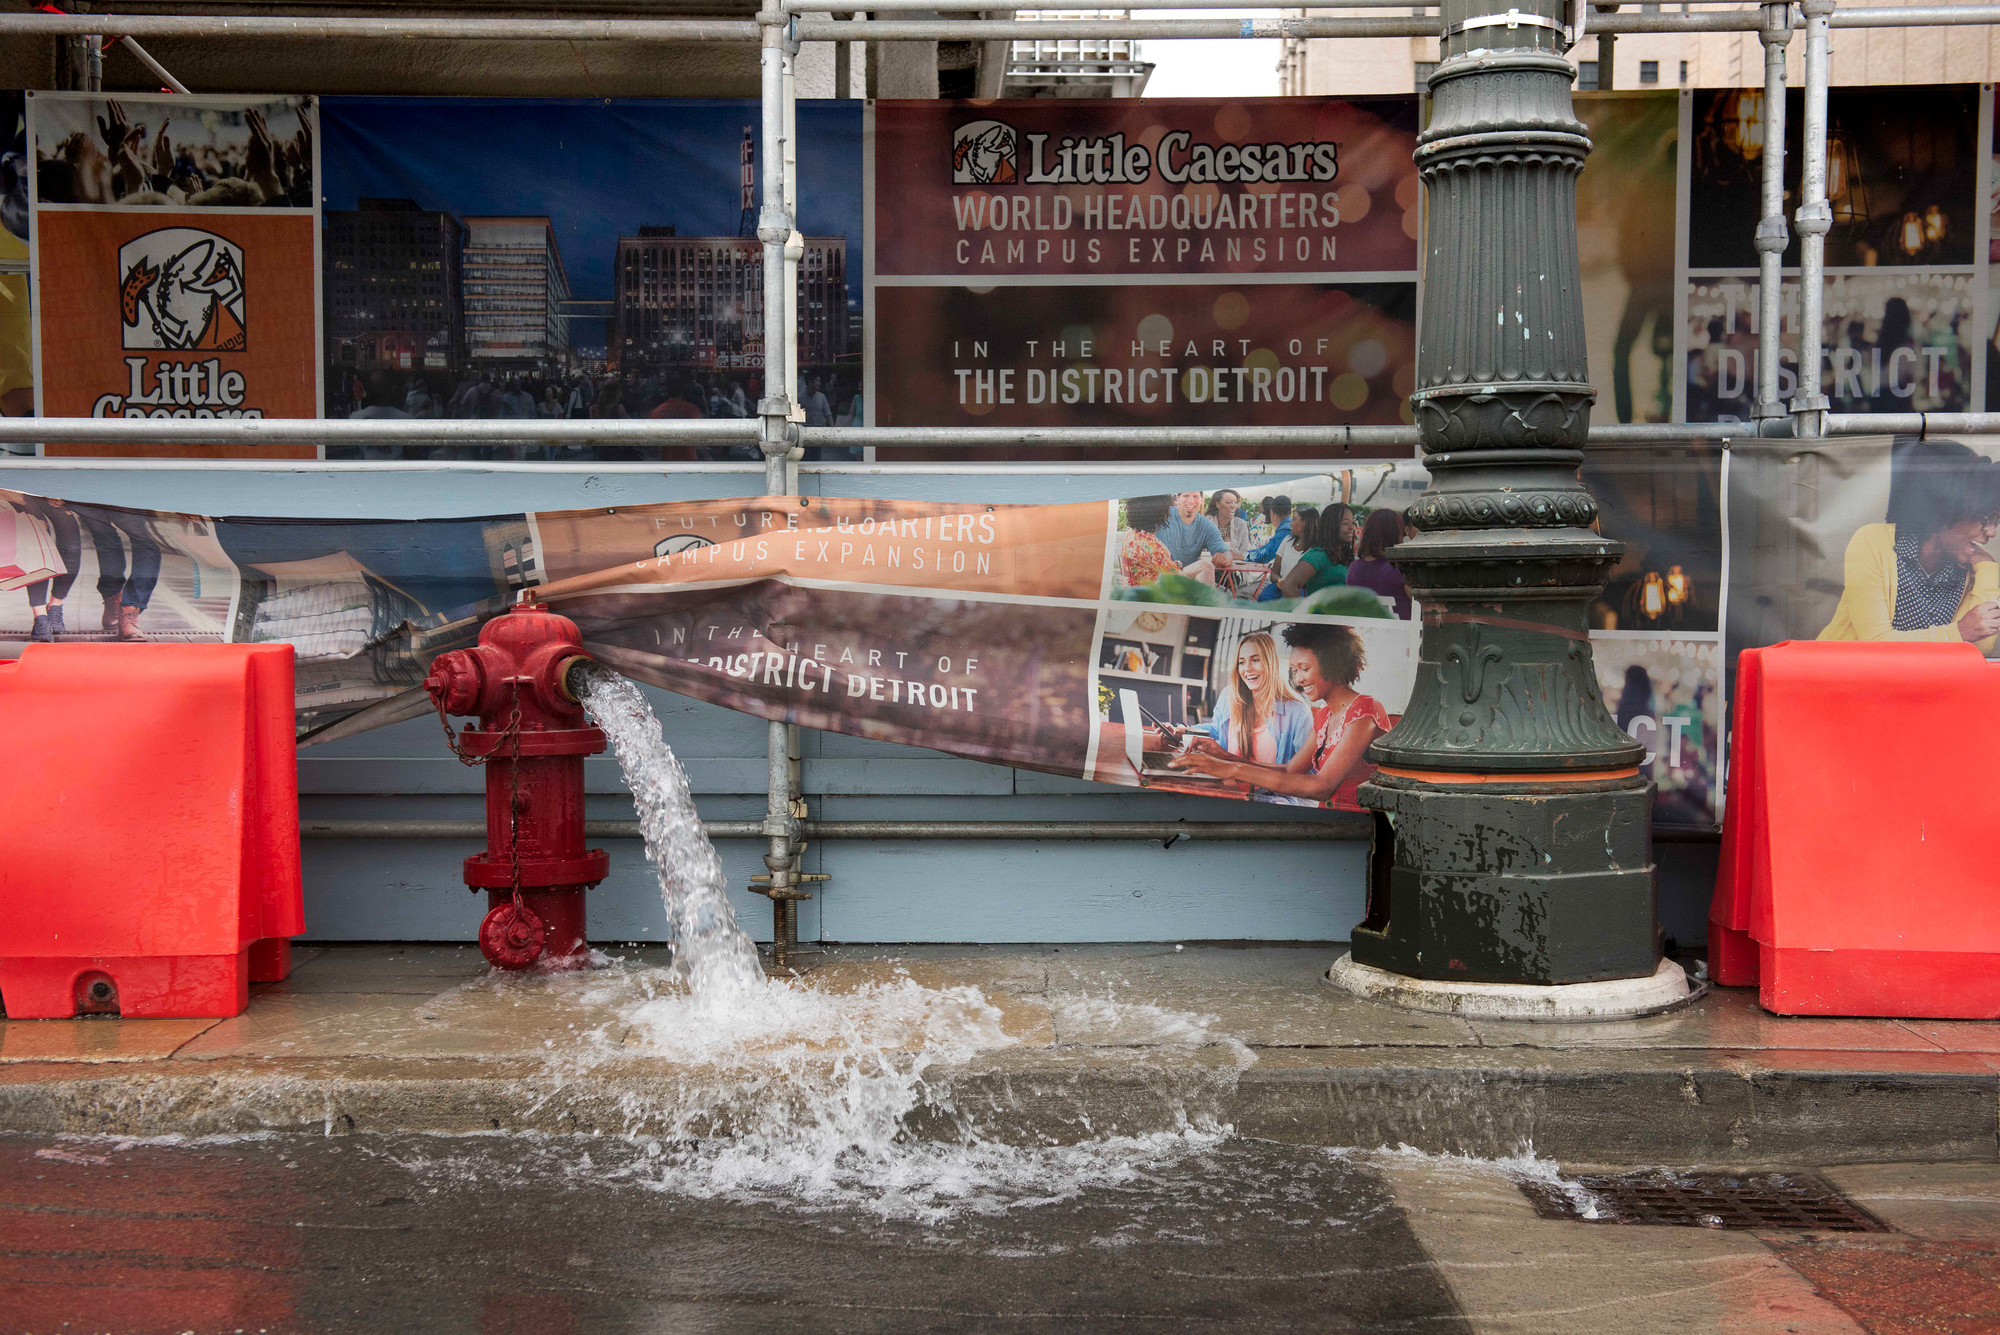 A red fire hydrant spews water onto the street in front of scaffolding and construction of the Little Caesar's Arena